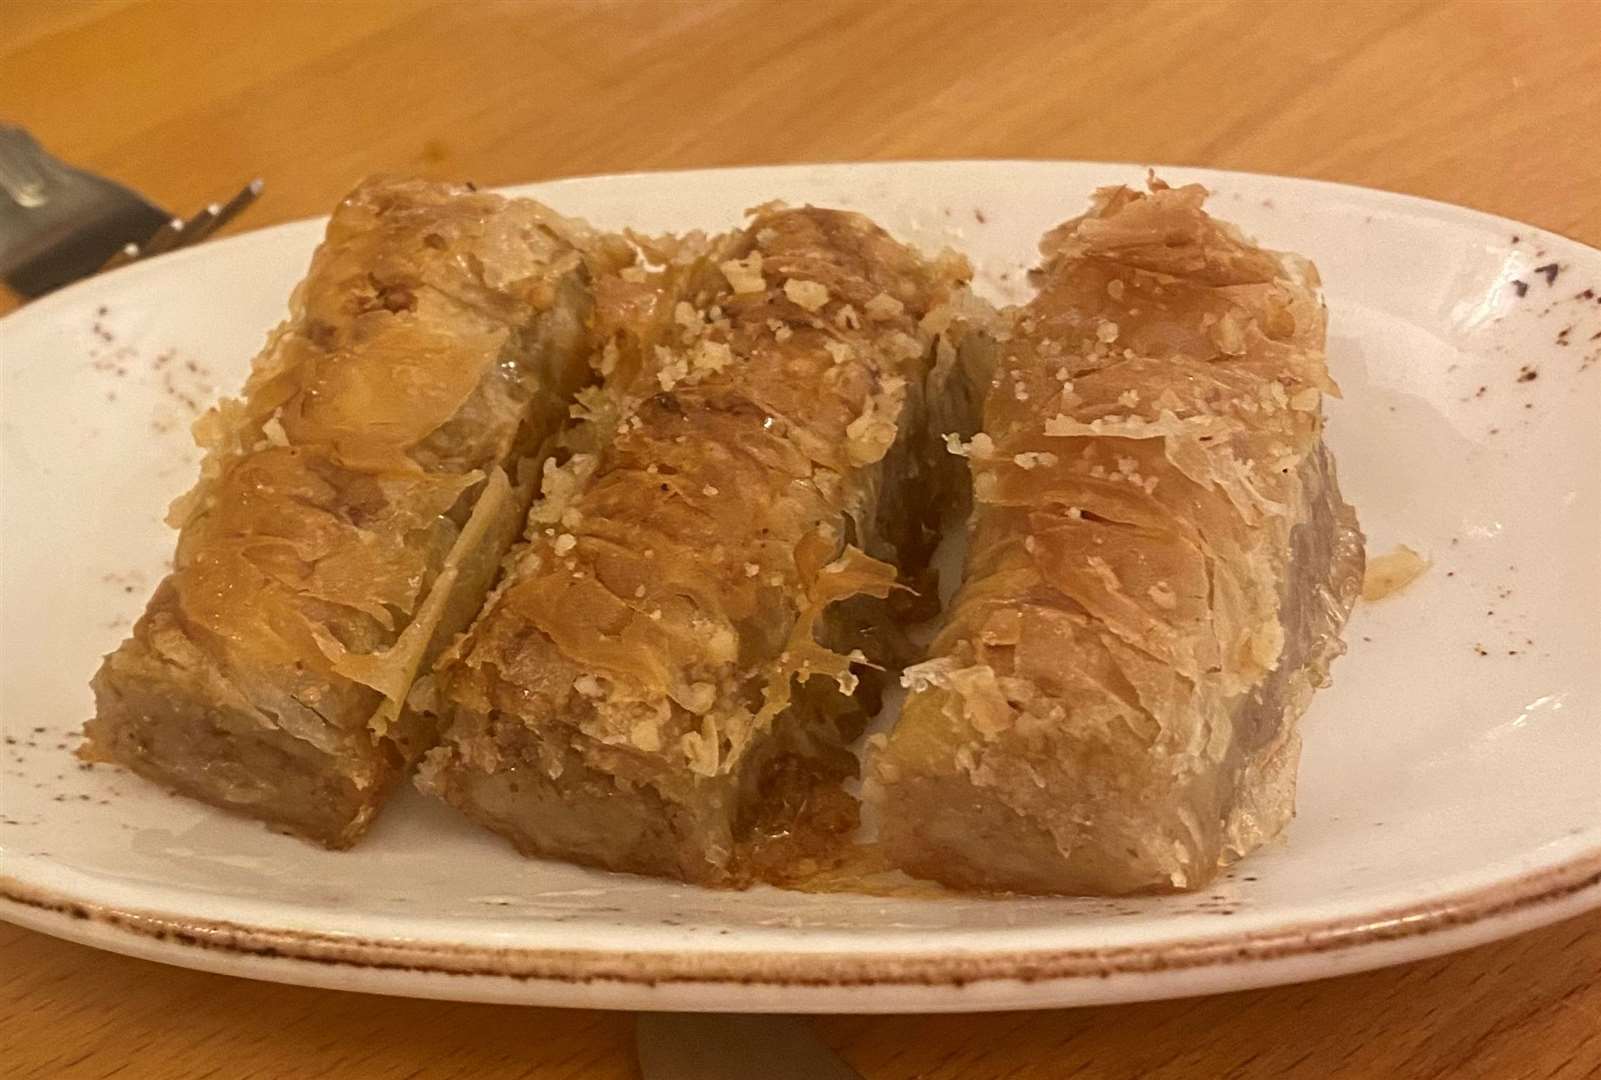 The baklava is sweet with honey, buttery and indulgent